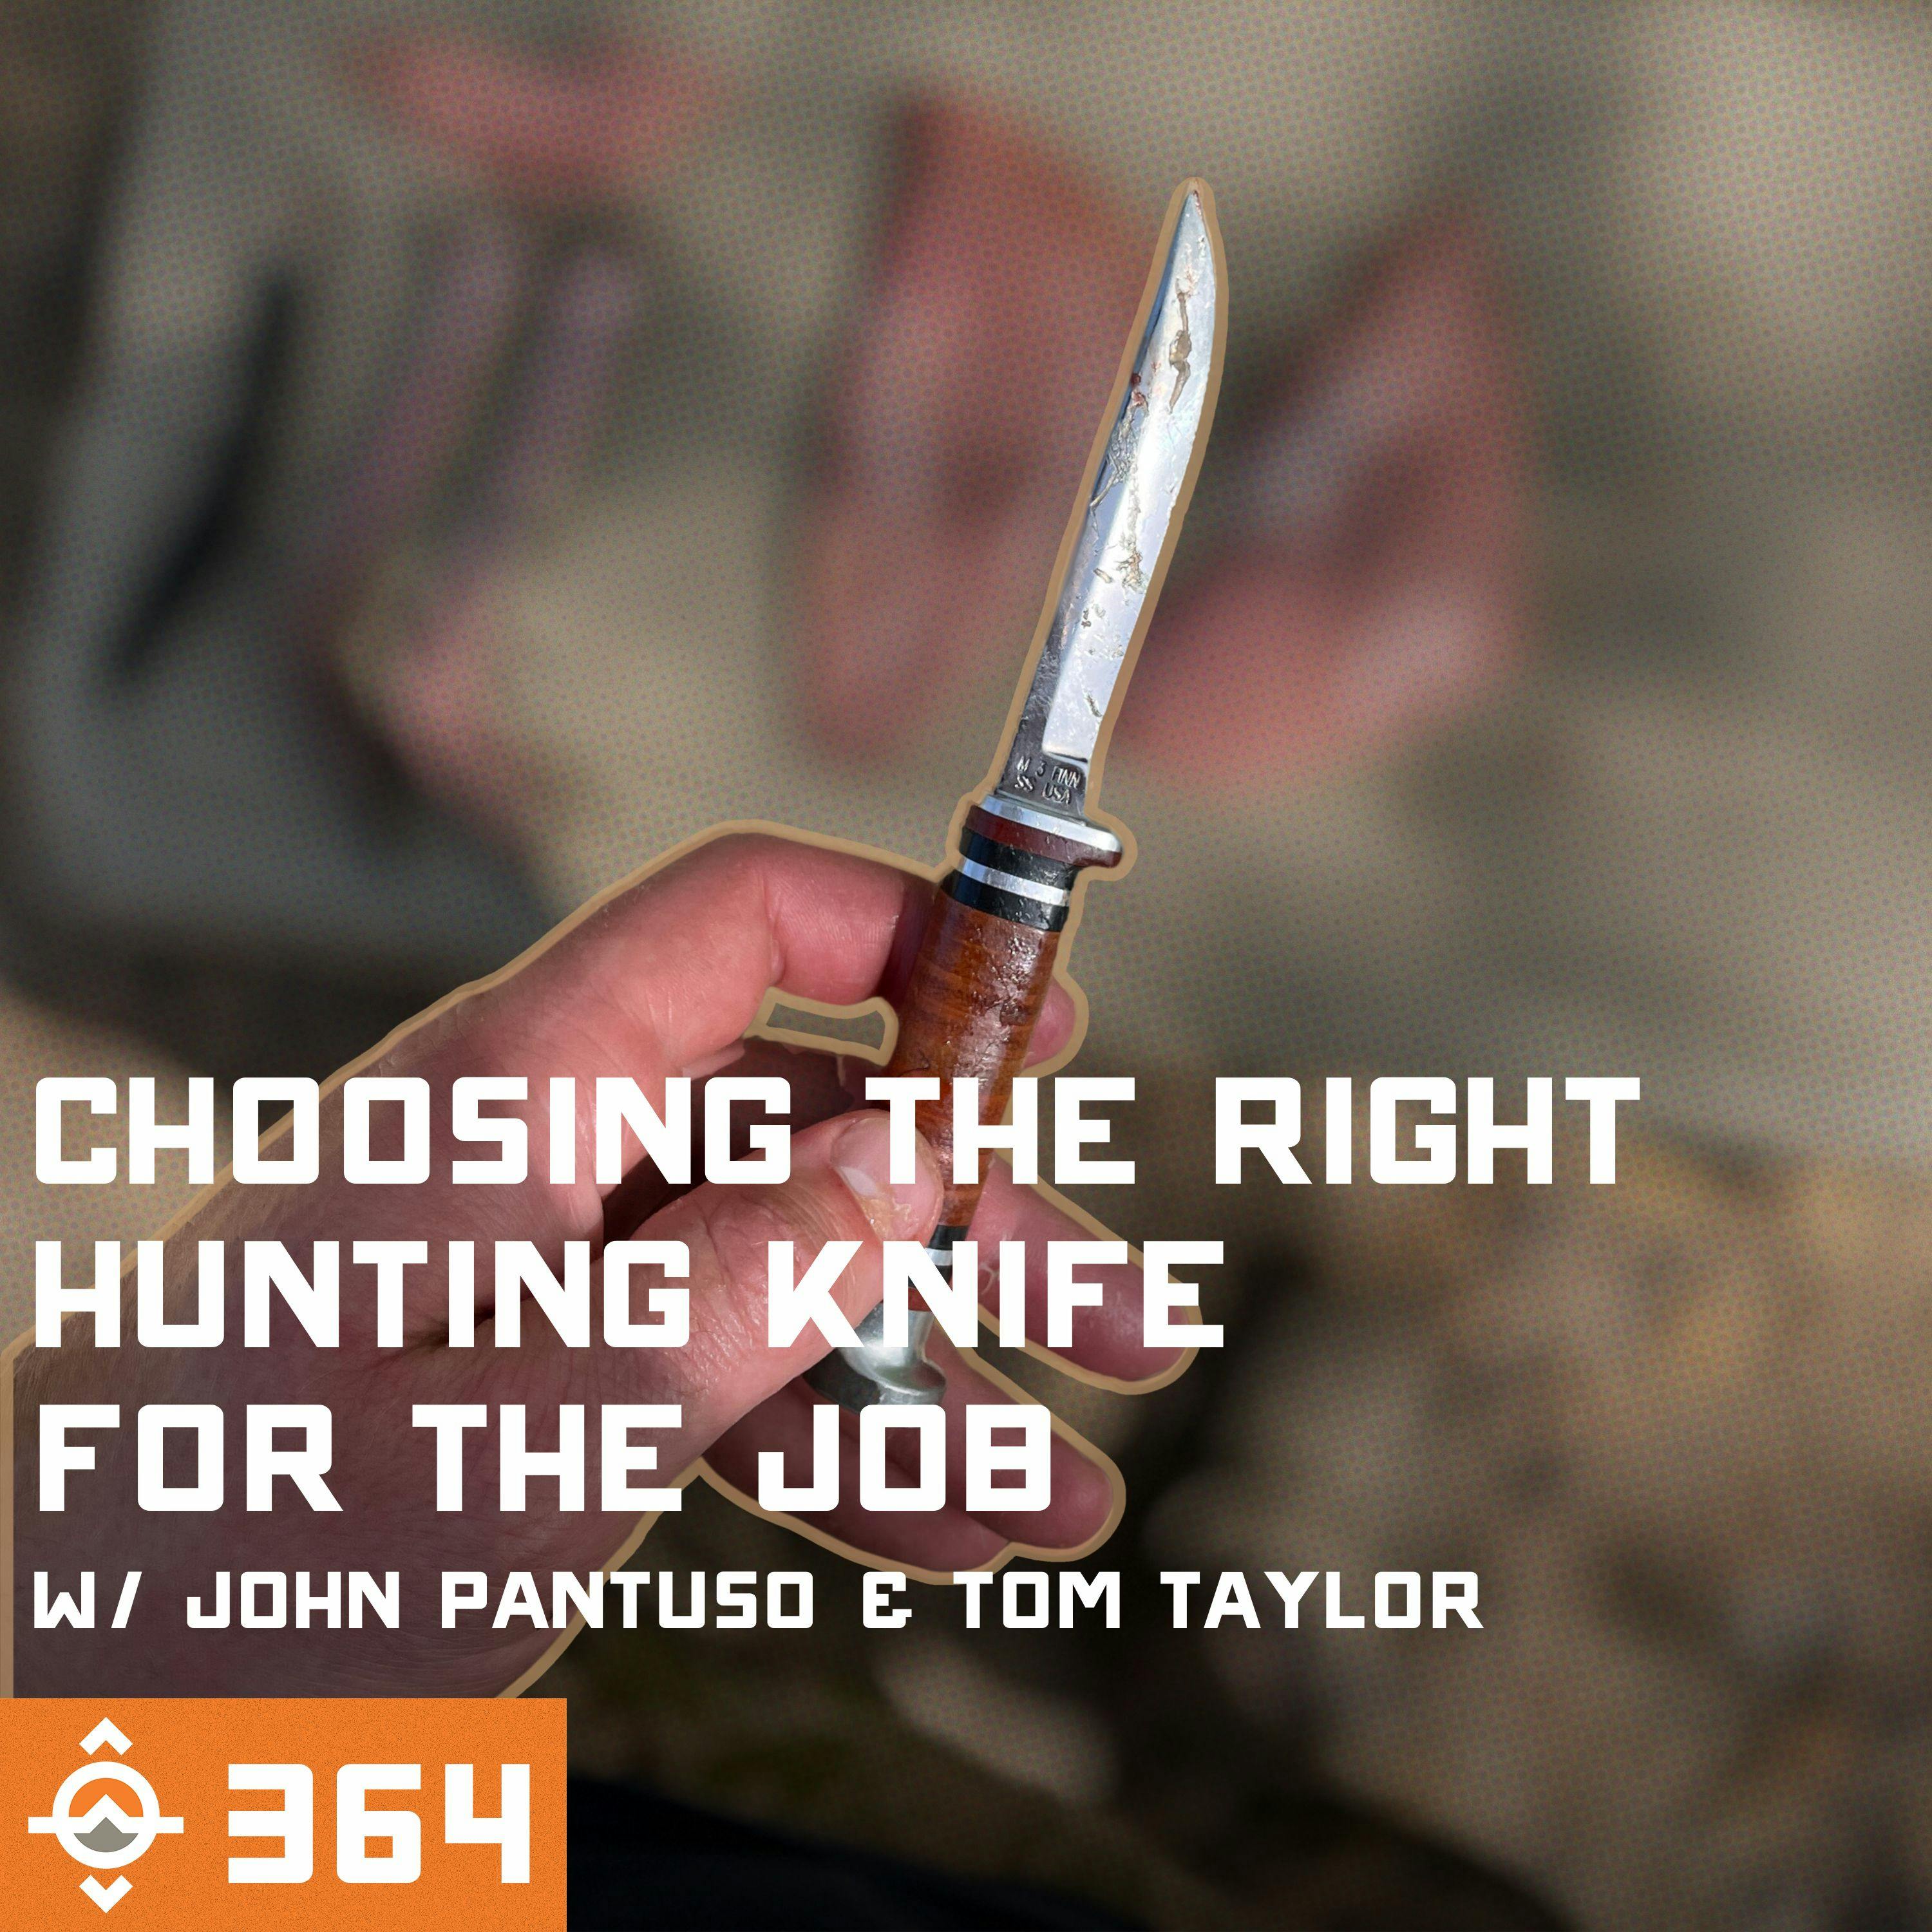 Ep. 364: Choosing the RIGHT Hunting Knife for the Job w/ John Pantuso and Tom Taylor // Case Knives